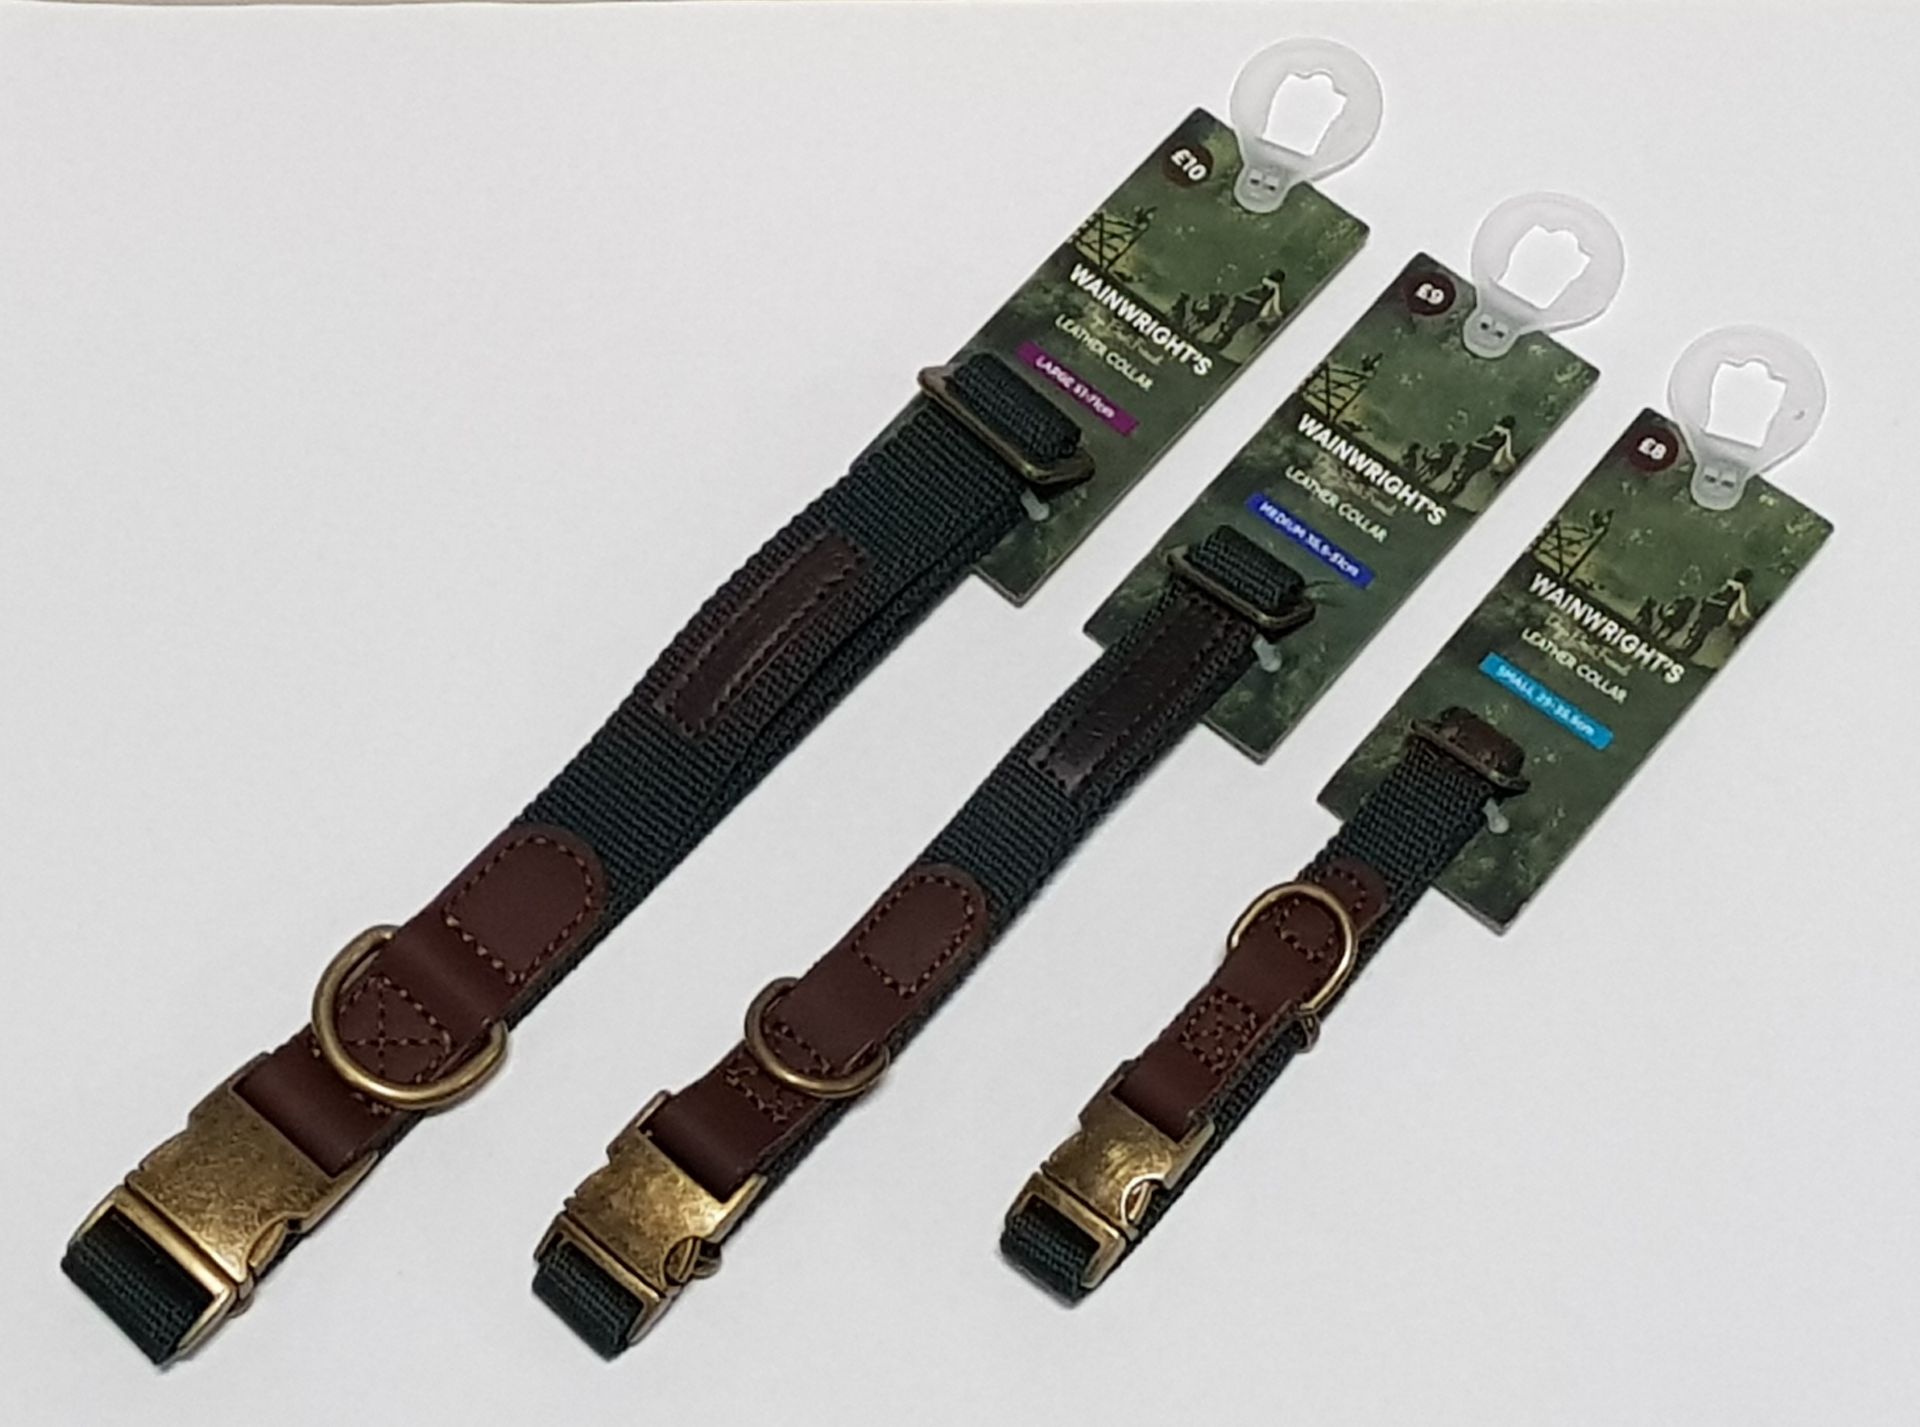 30 X BRAND NEW WAINWRIGHT'S QUALITY LEATHER / CANVAS DOG COLLARS IN 3 ASSORTED SIZES - LARGE 51-71CM